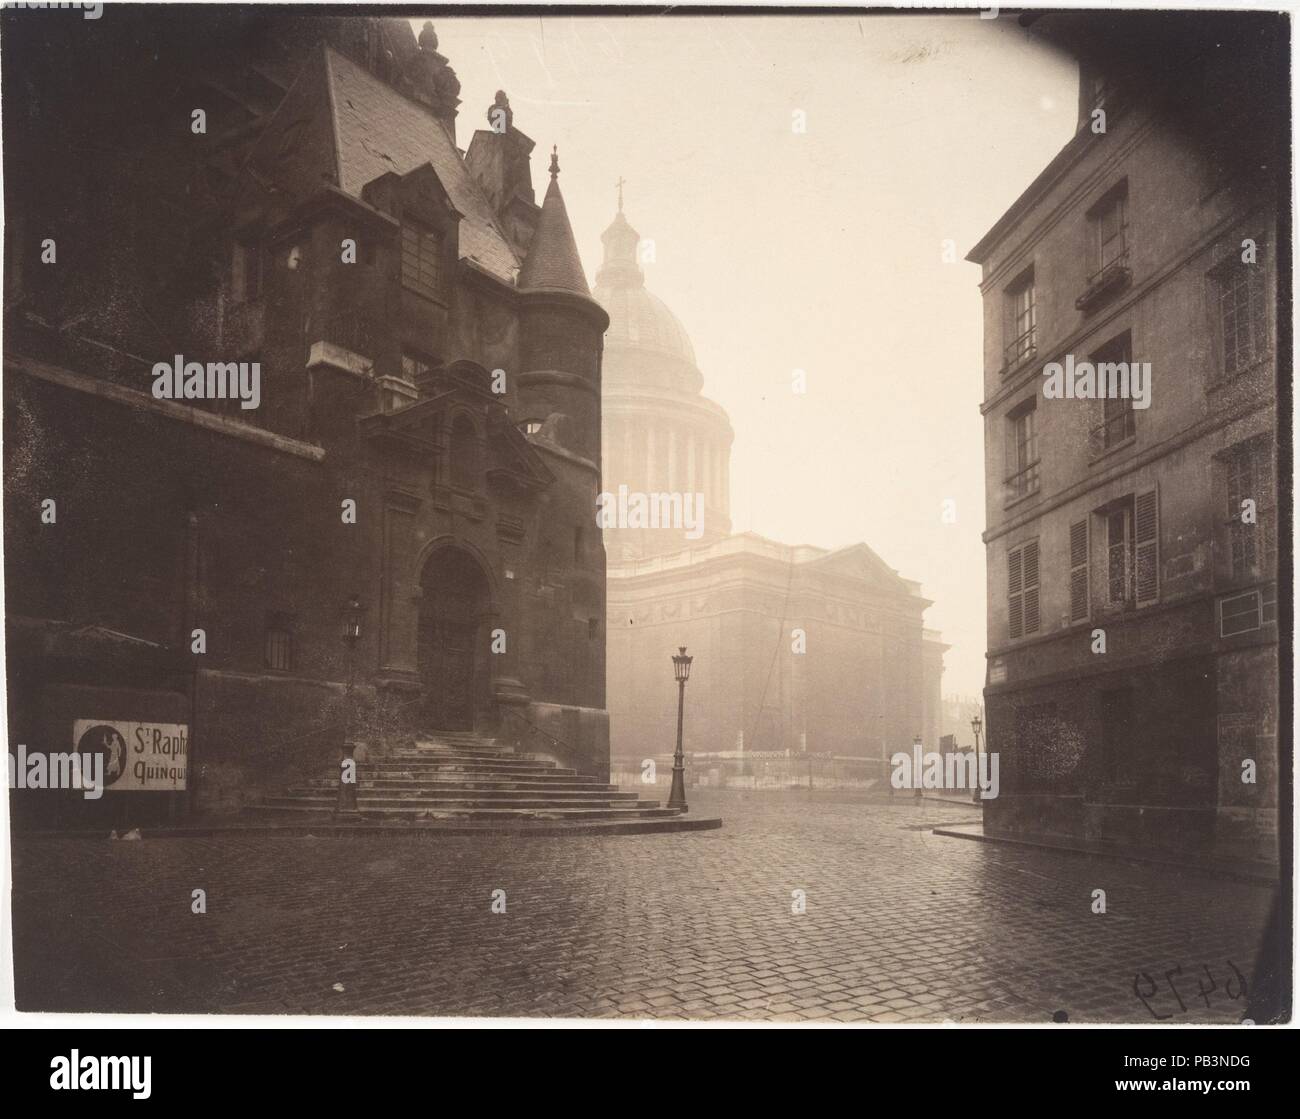 Rue de la Montagne-Sainte-Geneviève. Artist: Eugène Atget (French, Libourne 1857-1927 Paris). Dimensions: Image: 17.4 x 22.1 cm (6 7/8 x 8 11/16 in.)  Sheet: 17.7 × 22.5 cm (17.7 × 22.5 cm). Date: 1924.  In his early work, Atget often photographed in full midday sun so that his 'documents' would record all the details of architectural or ornamental subjects. In his late work, such as this view of the Pantheon, he often photographed in the early morning, when the absence of people and the presence of a softly luminous light suffused his scenes with quietude. The photograph is clearly an evocati Stock Photo